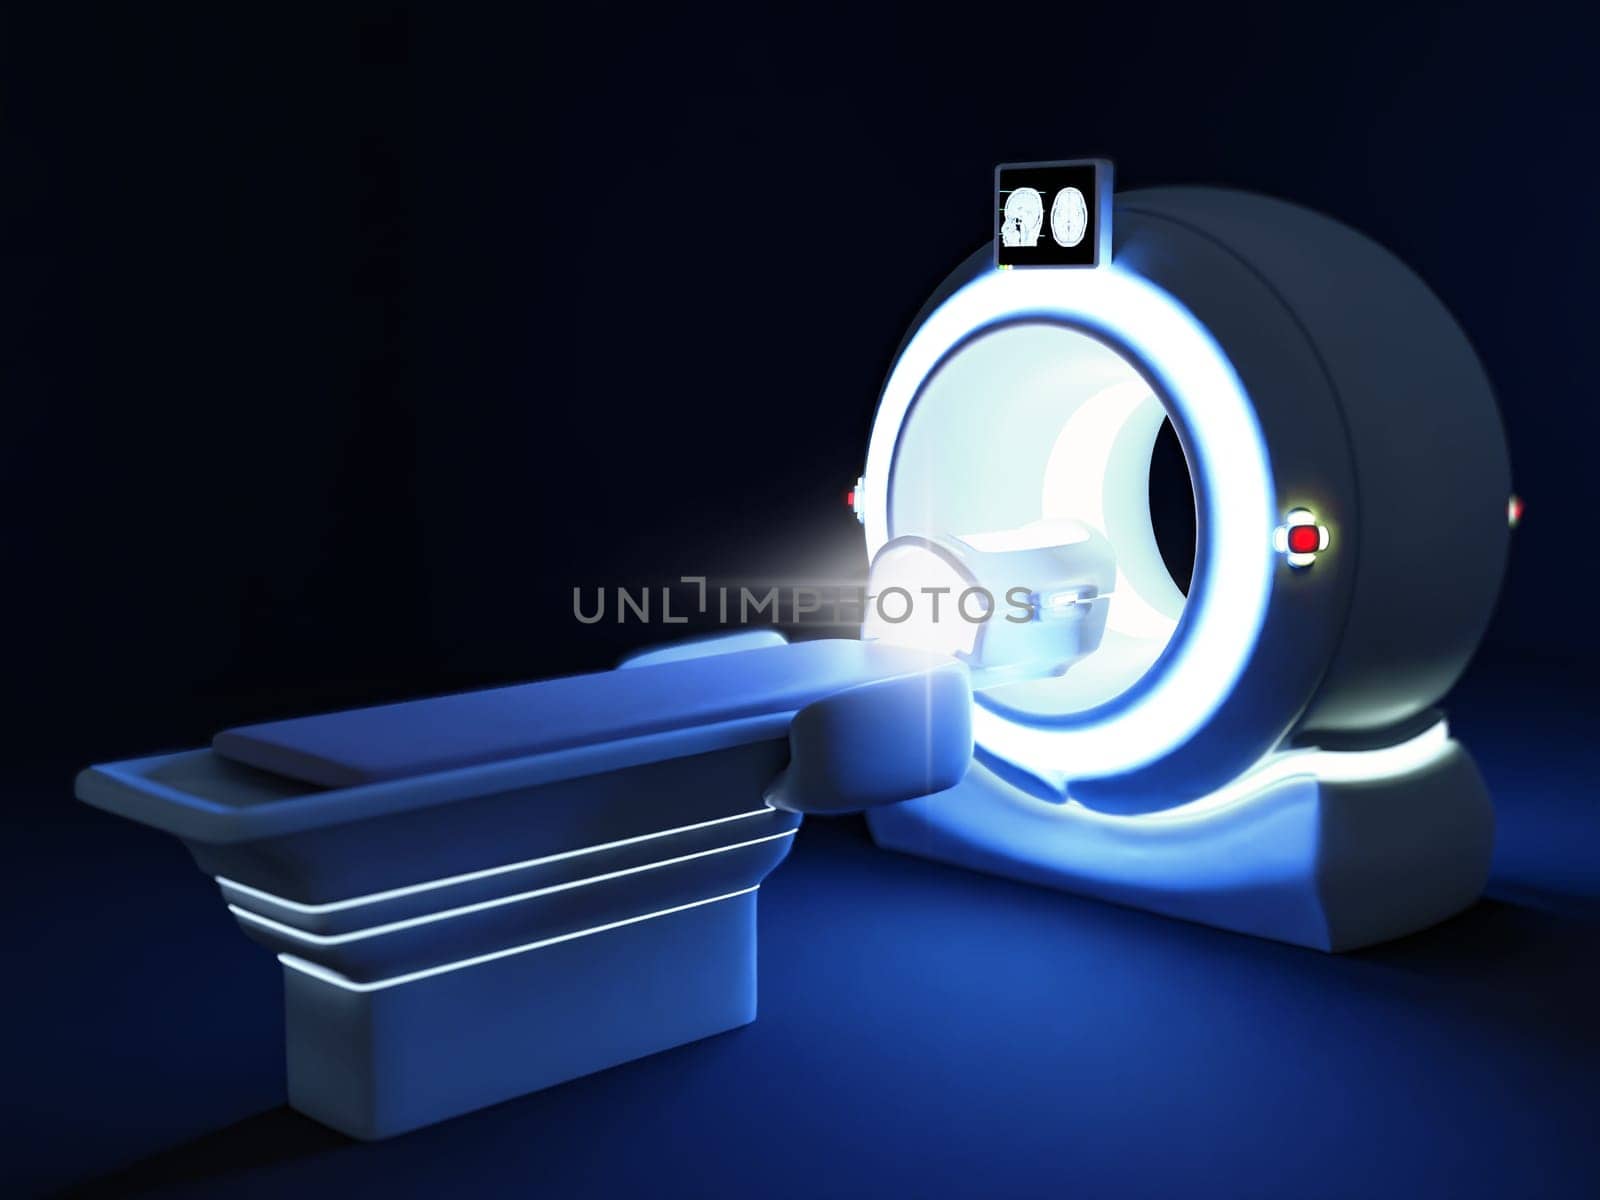 Side view of MRI SCANNER - Magnetic resonance imaging  device in Hospital 3D rendering  . Medical Equipment and Health Care background. by samunella